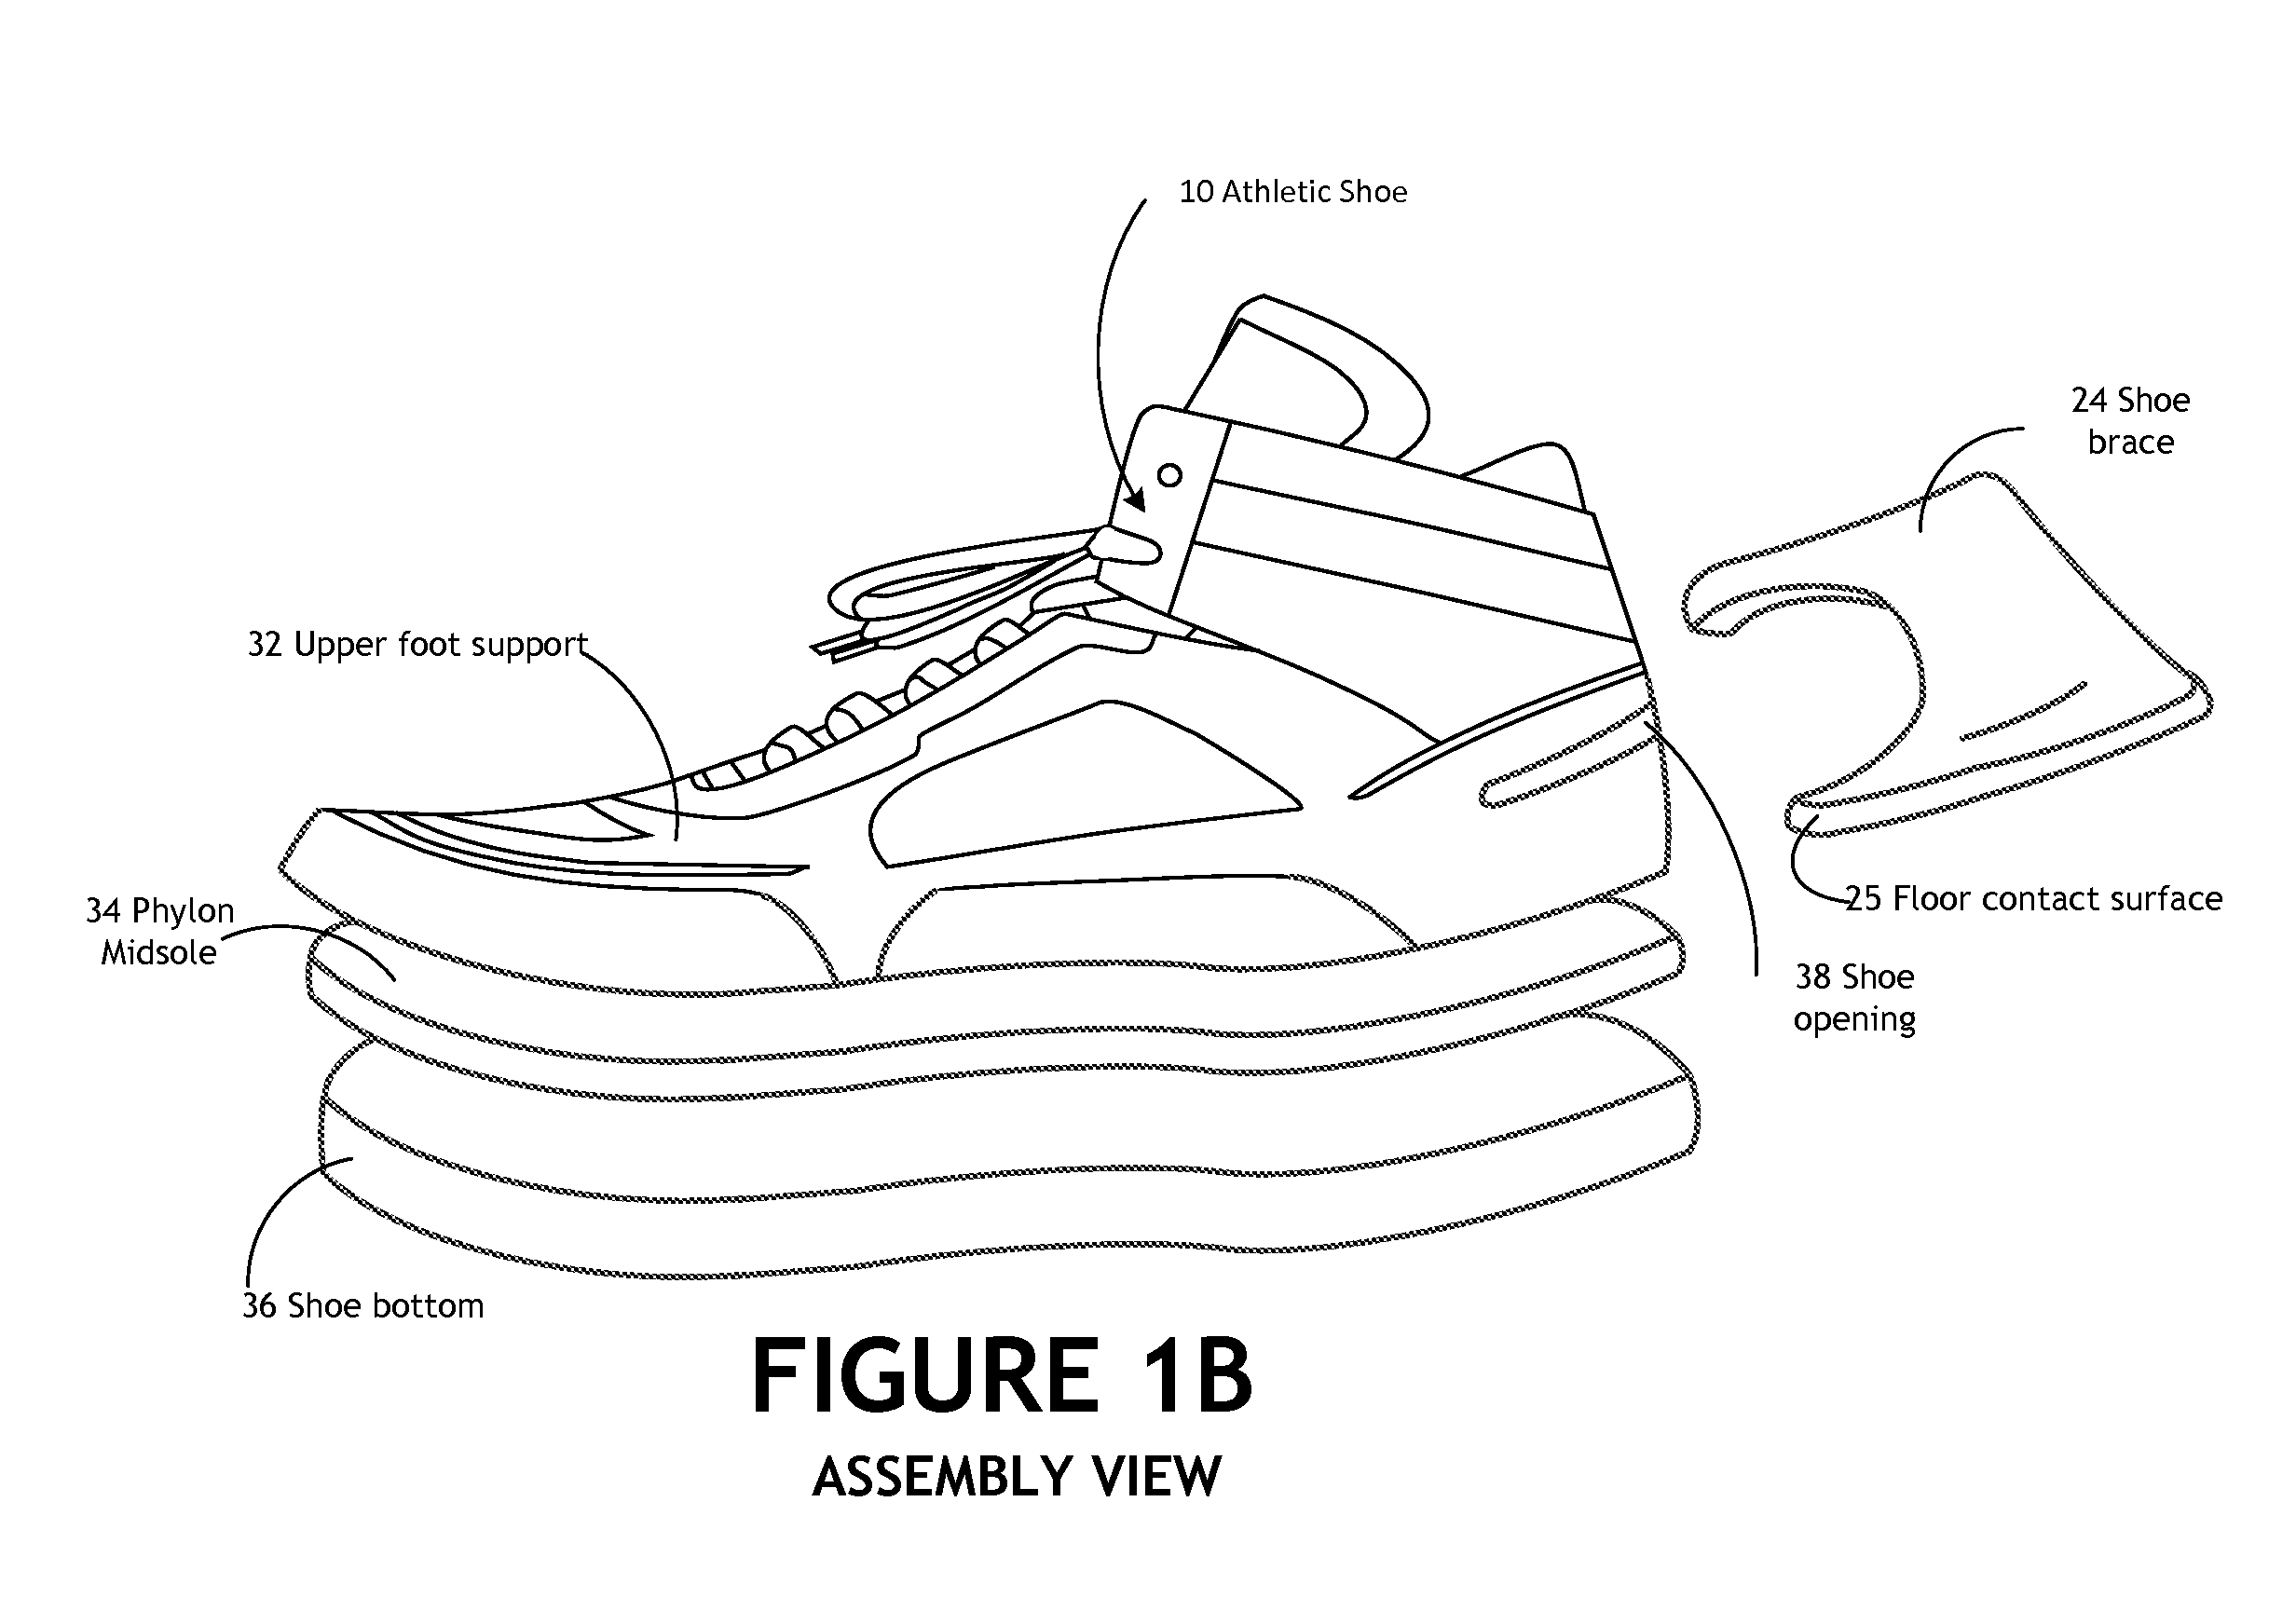 Ankle inversion and eversion prevention shoe